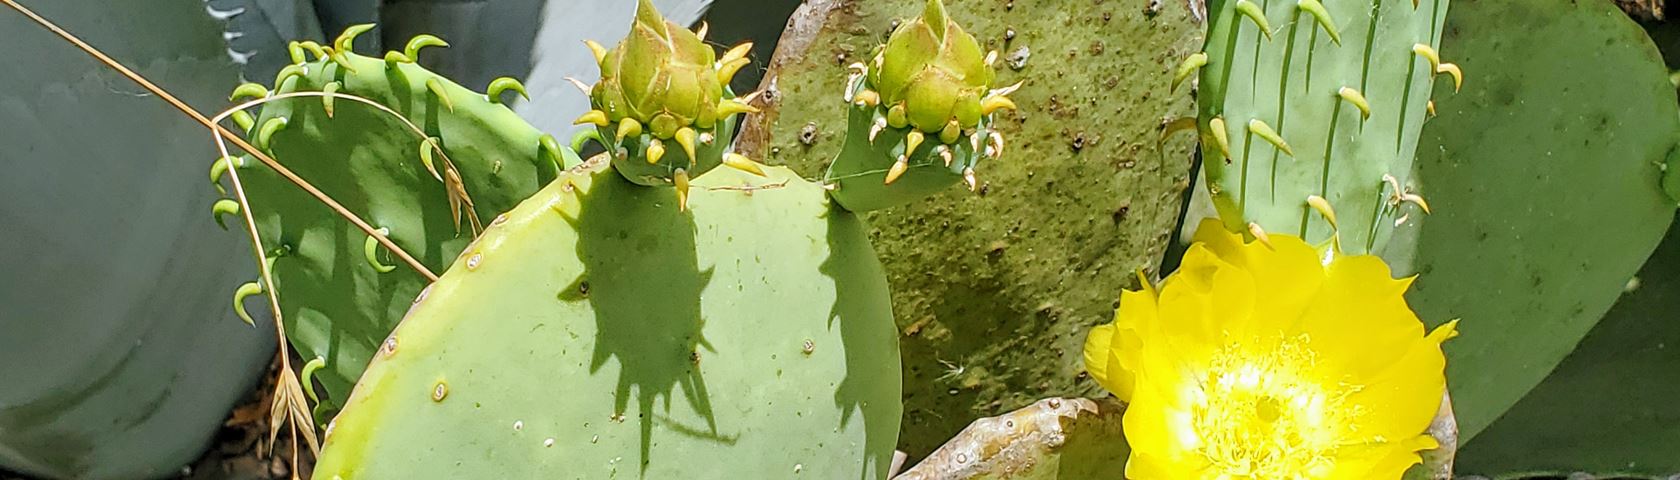 Cactus Buds and Bloom